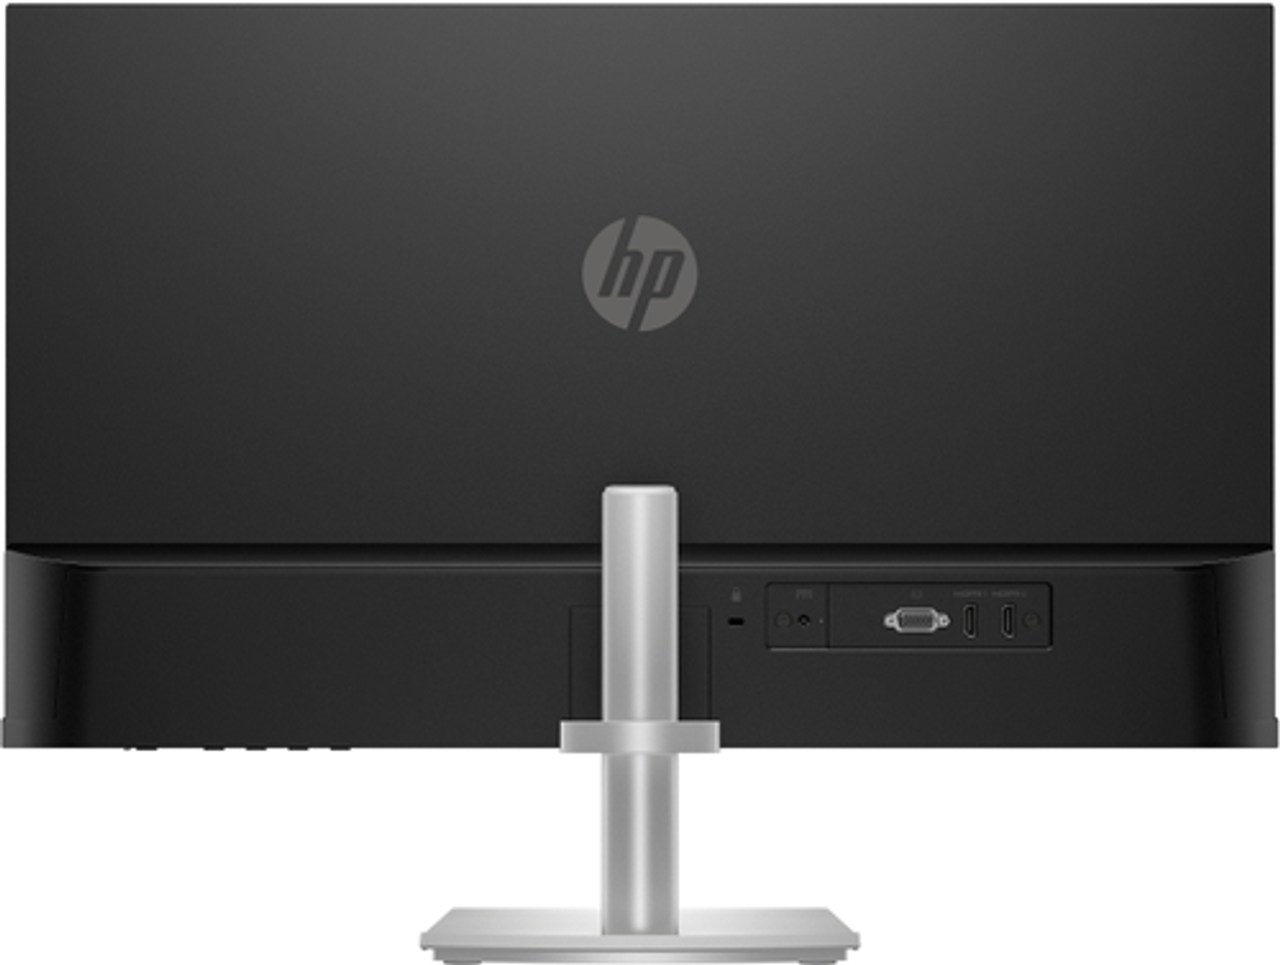 HP - 27" IPS LED FHD Monitor with Adjustable Height (HDMI, VGA) - Silver & Black